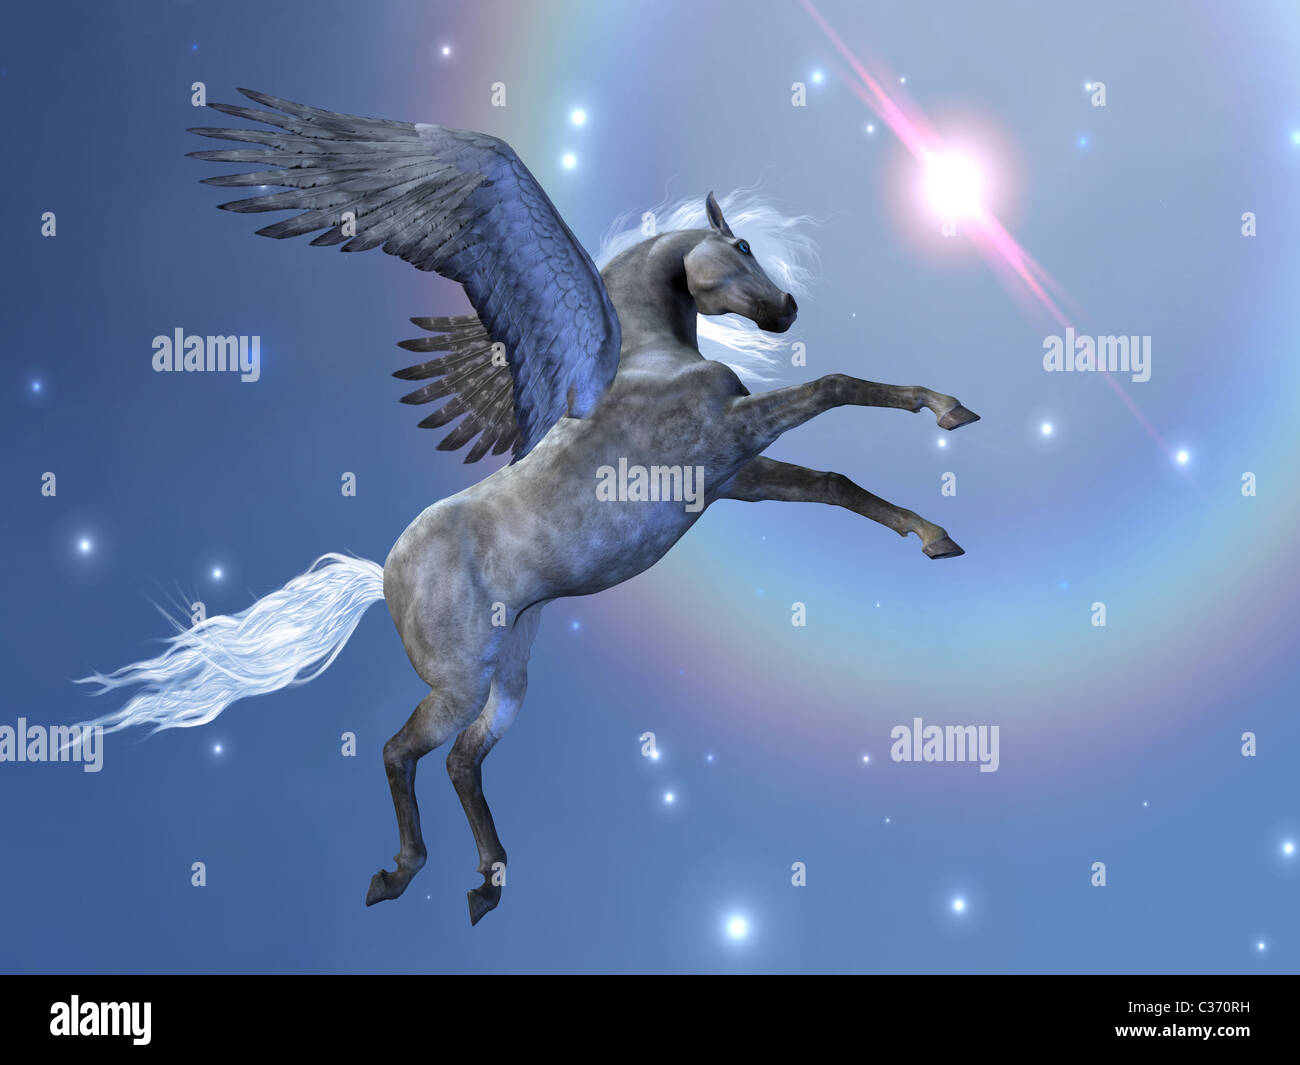 Pegasus flies up among the stars in the sky. Stock Photo